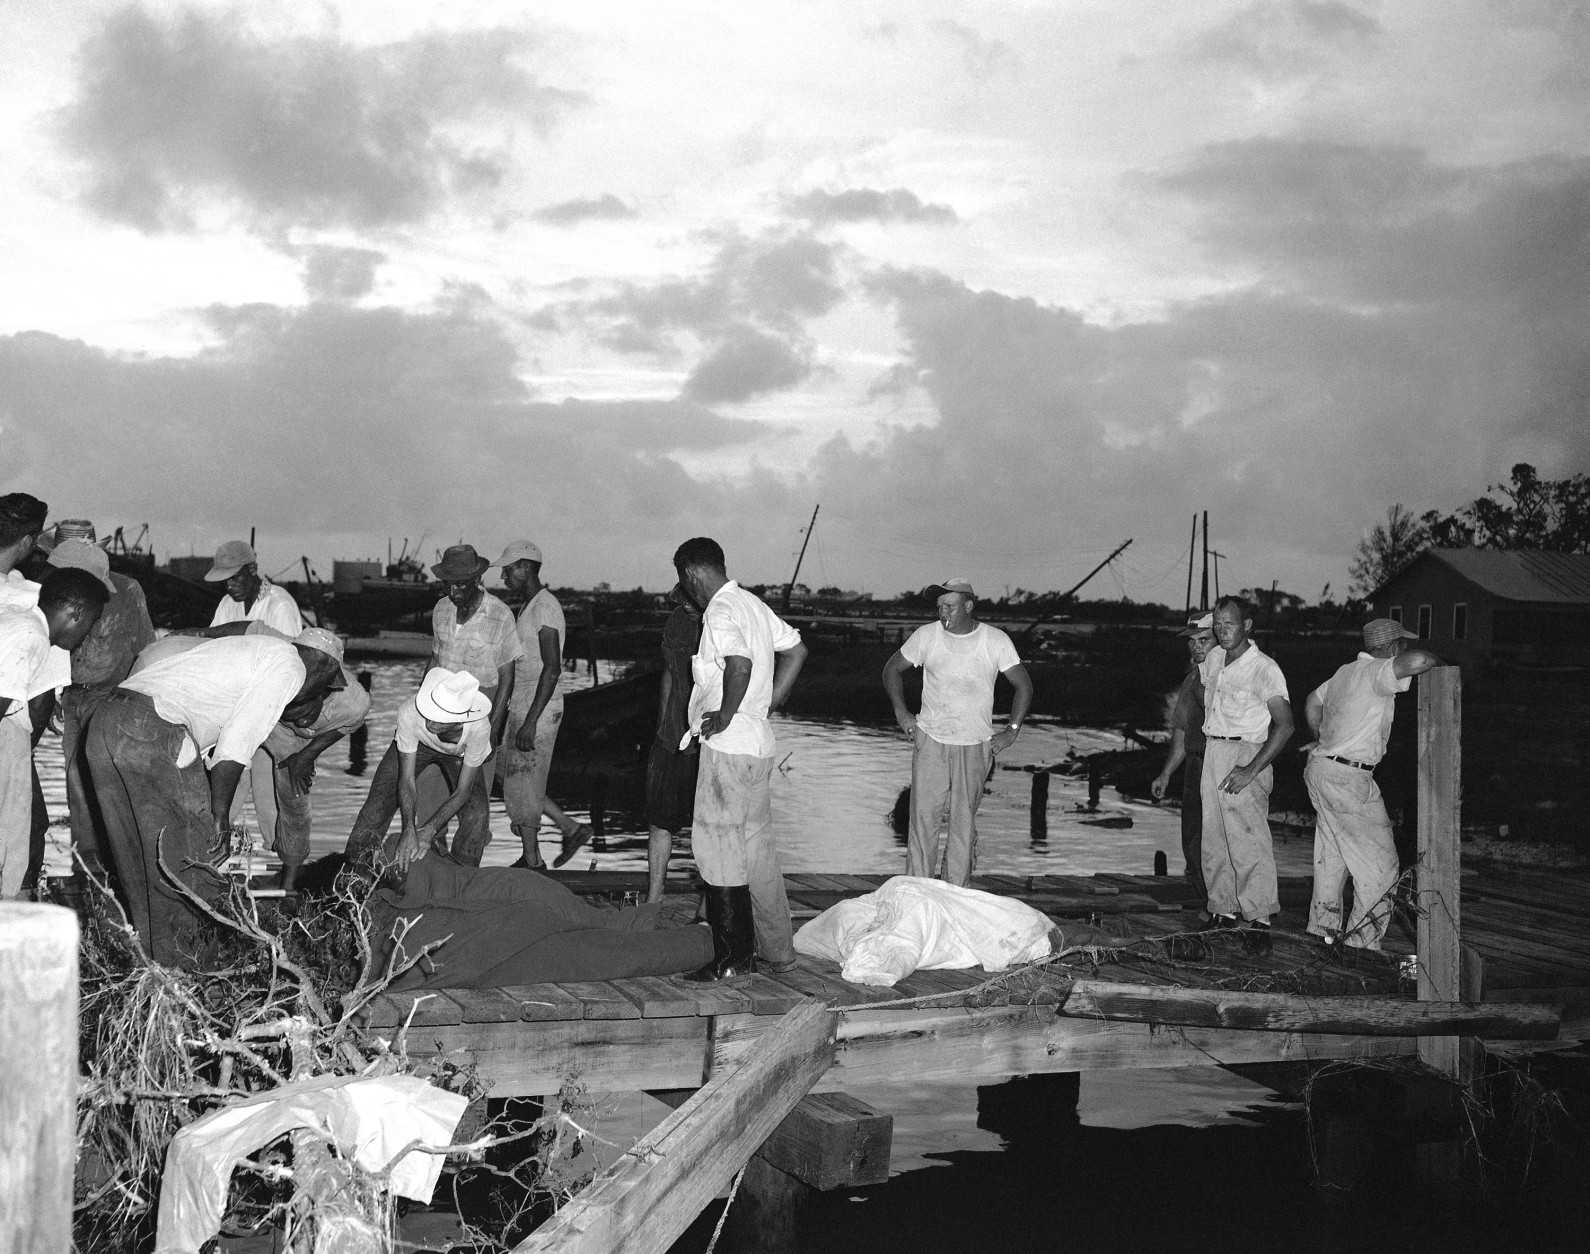 A group of people begin the grim task of identifying those killed when hurricane Audrey swept through this small coastal town in Cameron, La., on June 29, 1957. About 50 persons are known dead and about 150 are missing. (AP Photo/Randy Taylor)